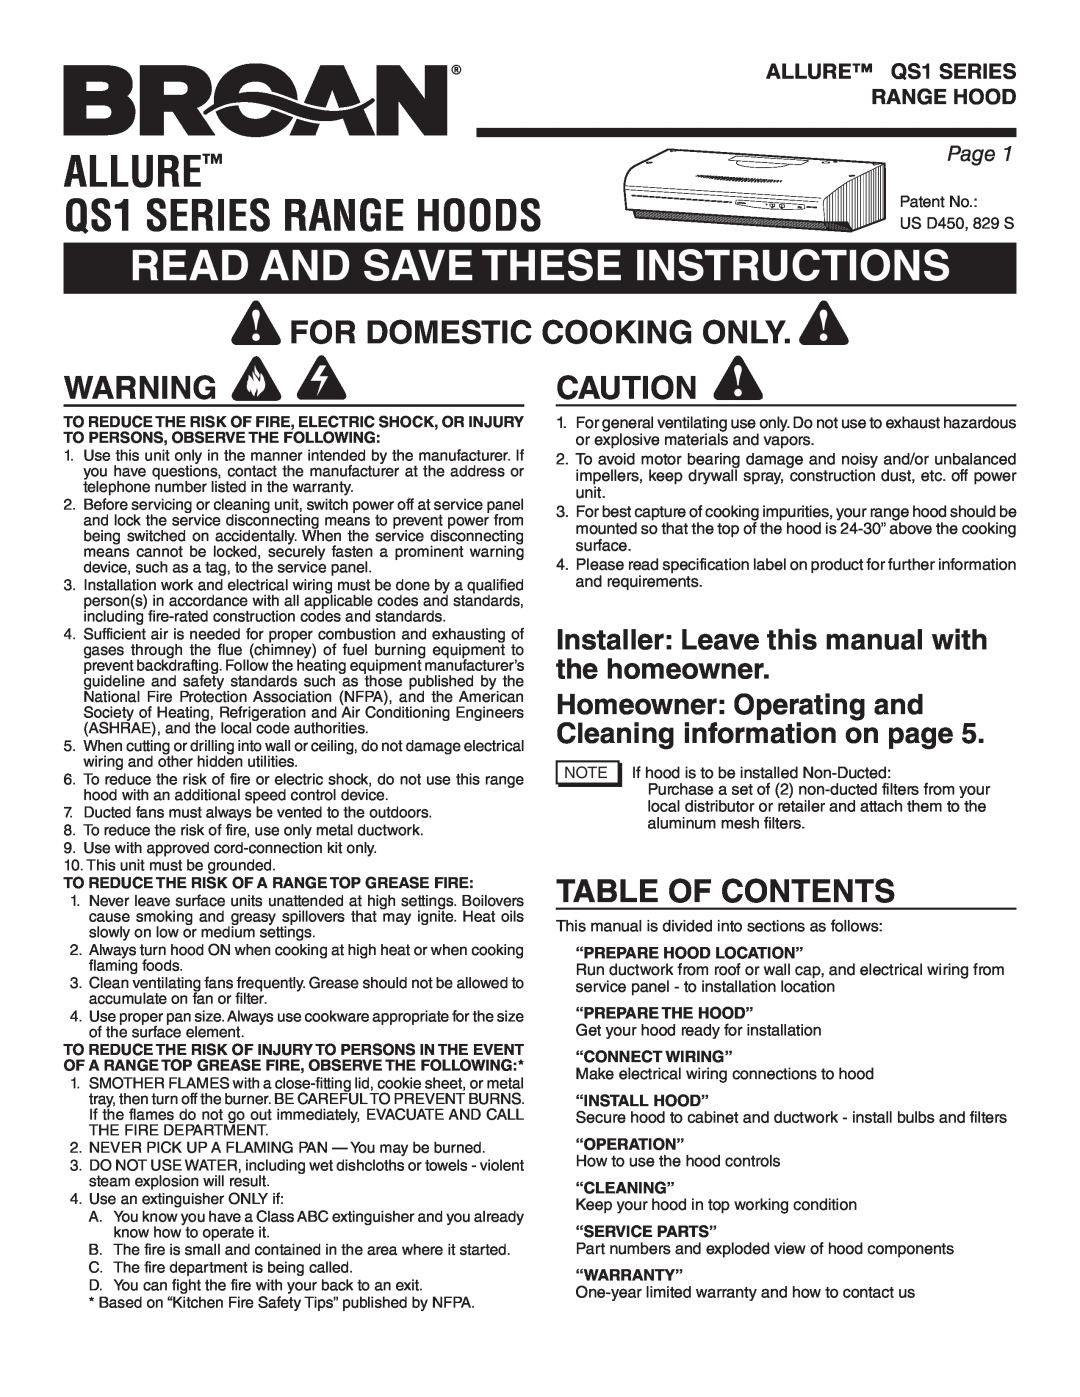 Broan QS130BL warranty Allure, QS1 SERIES RANGE HOODS, Read And Save These Instructions, For Domestic Cooking Only, Page 